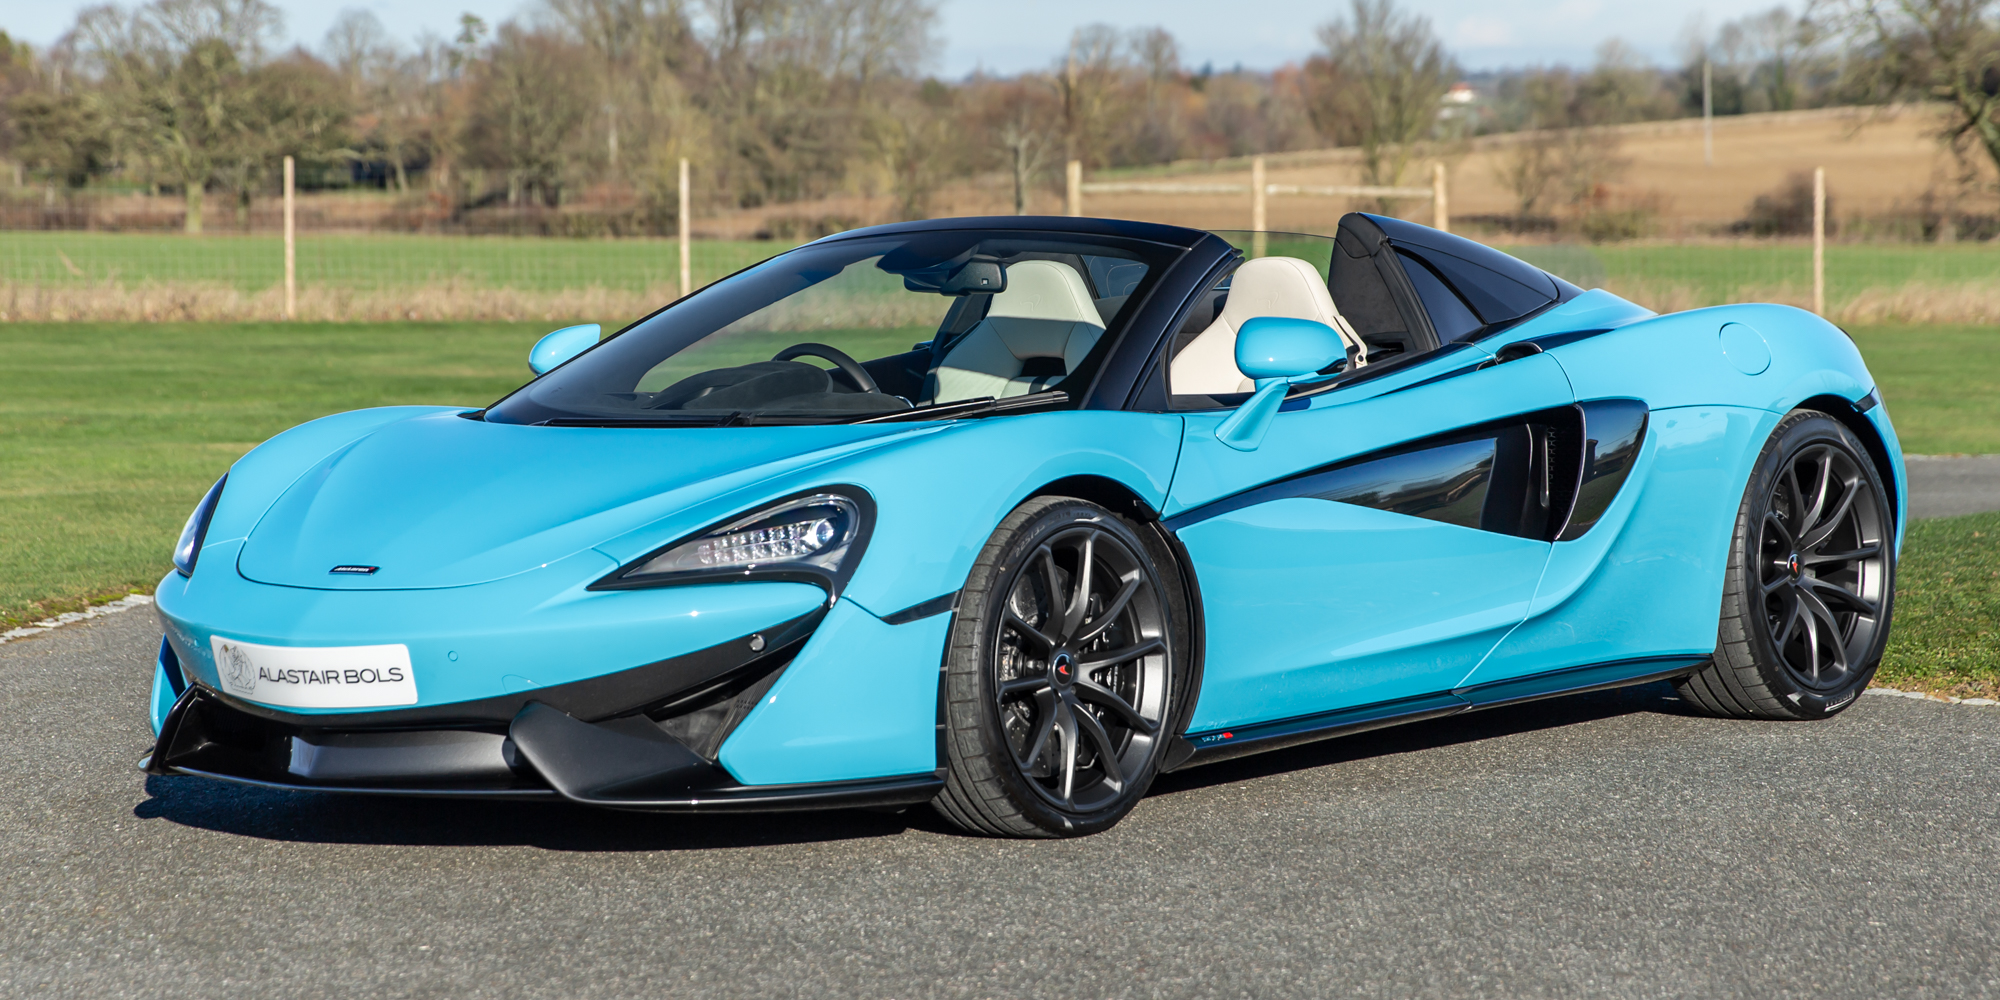 McLaren 570S Spider – LOOKING FOR OTHERS